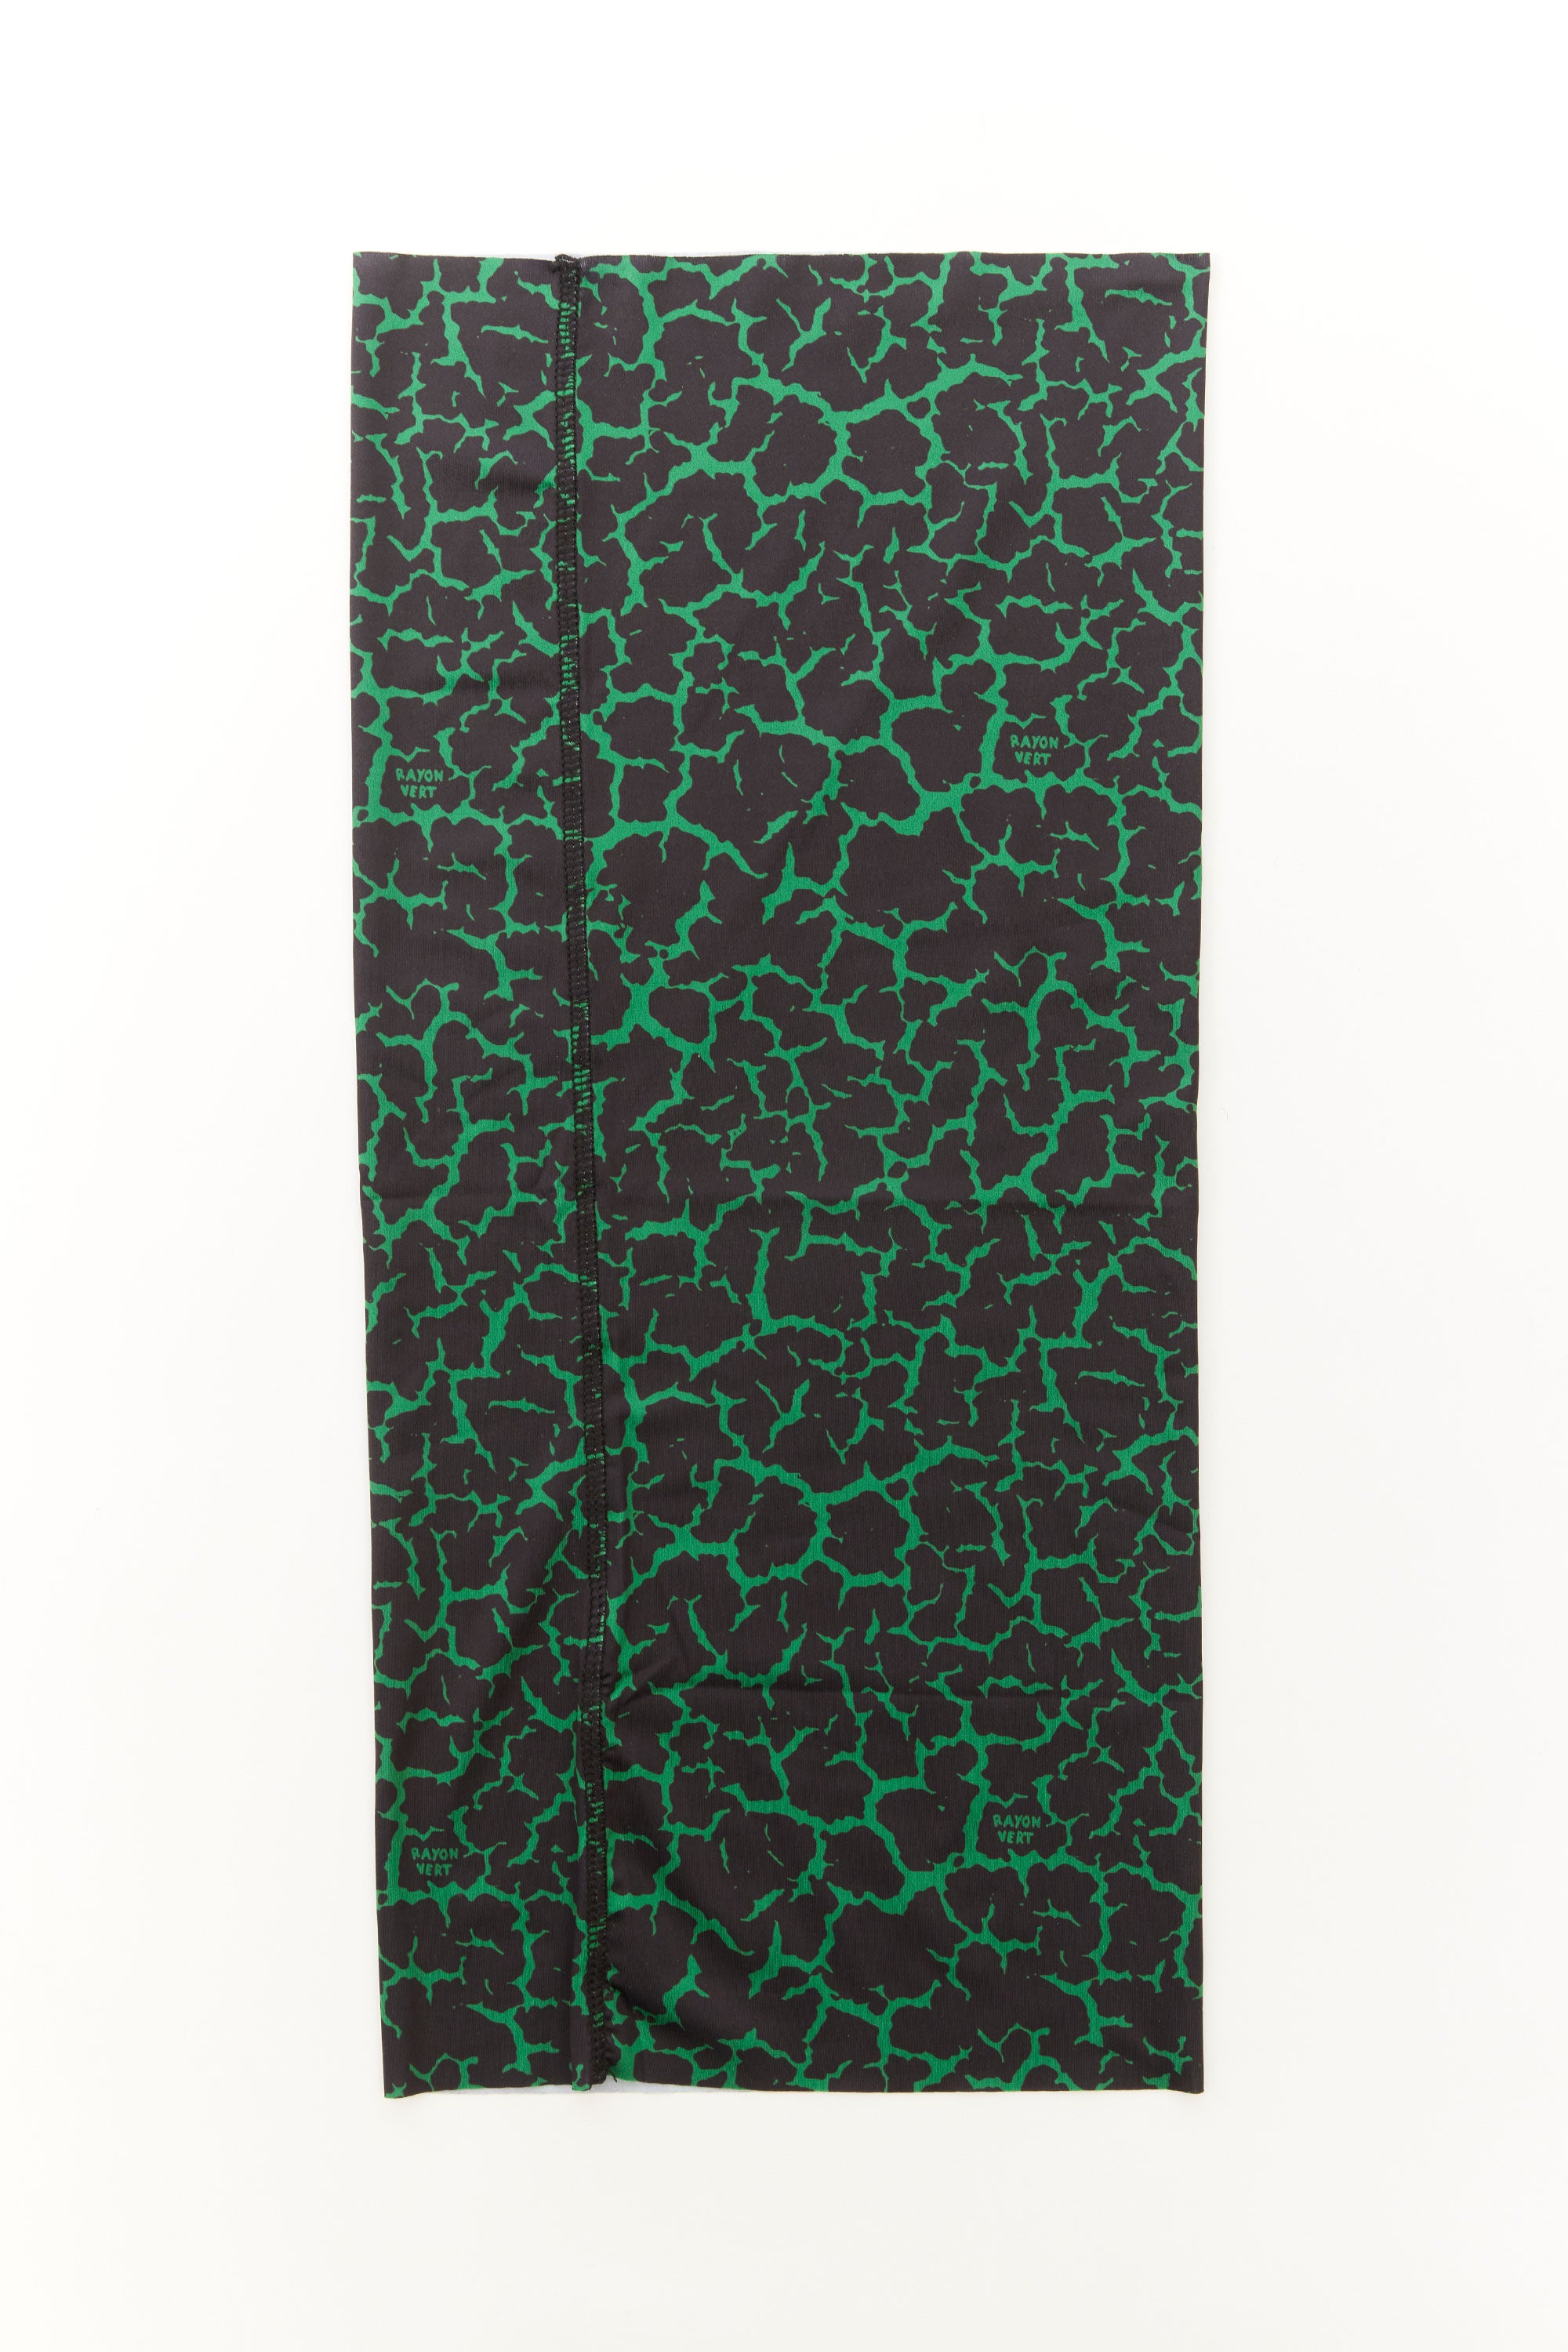 The RAYON VERT - HEAD GAITER CRACK PRINT  available online with global shipping, and in PAM Stores Melbourne and Sydney.